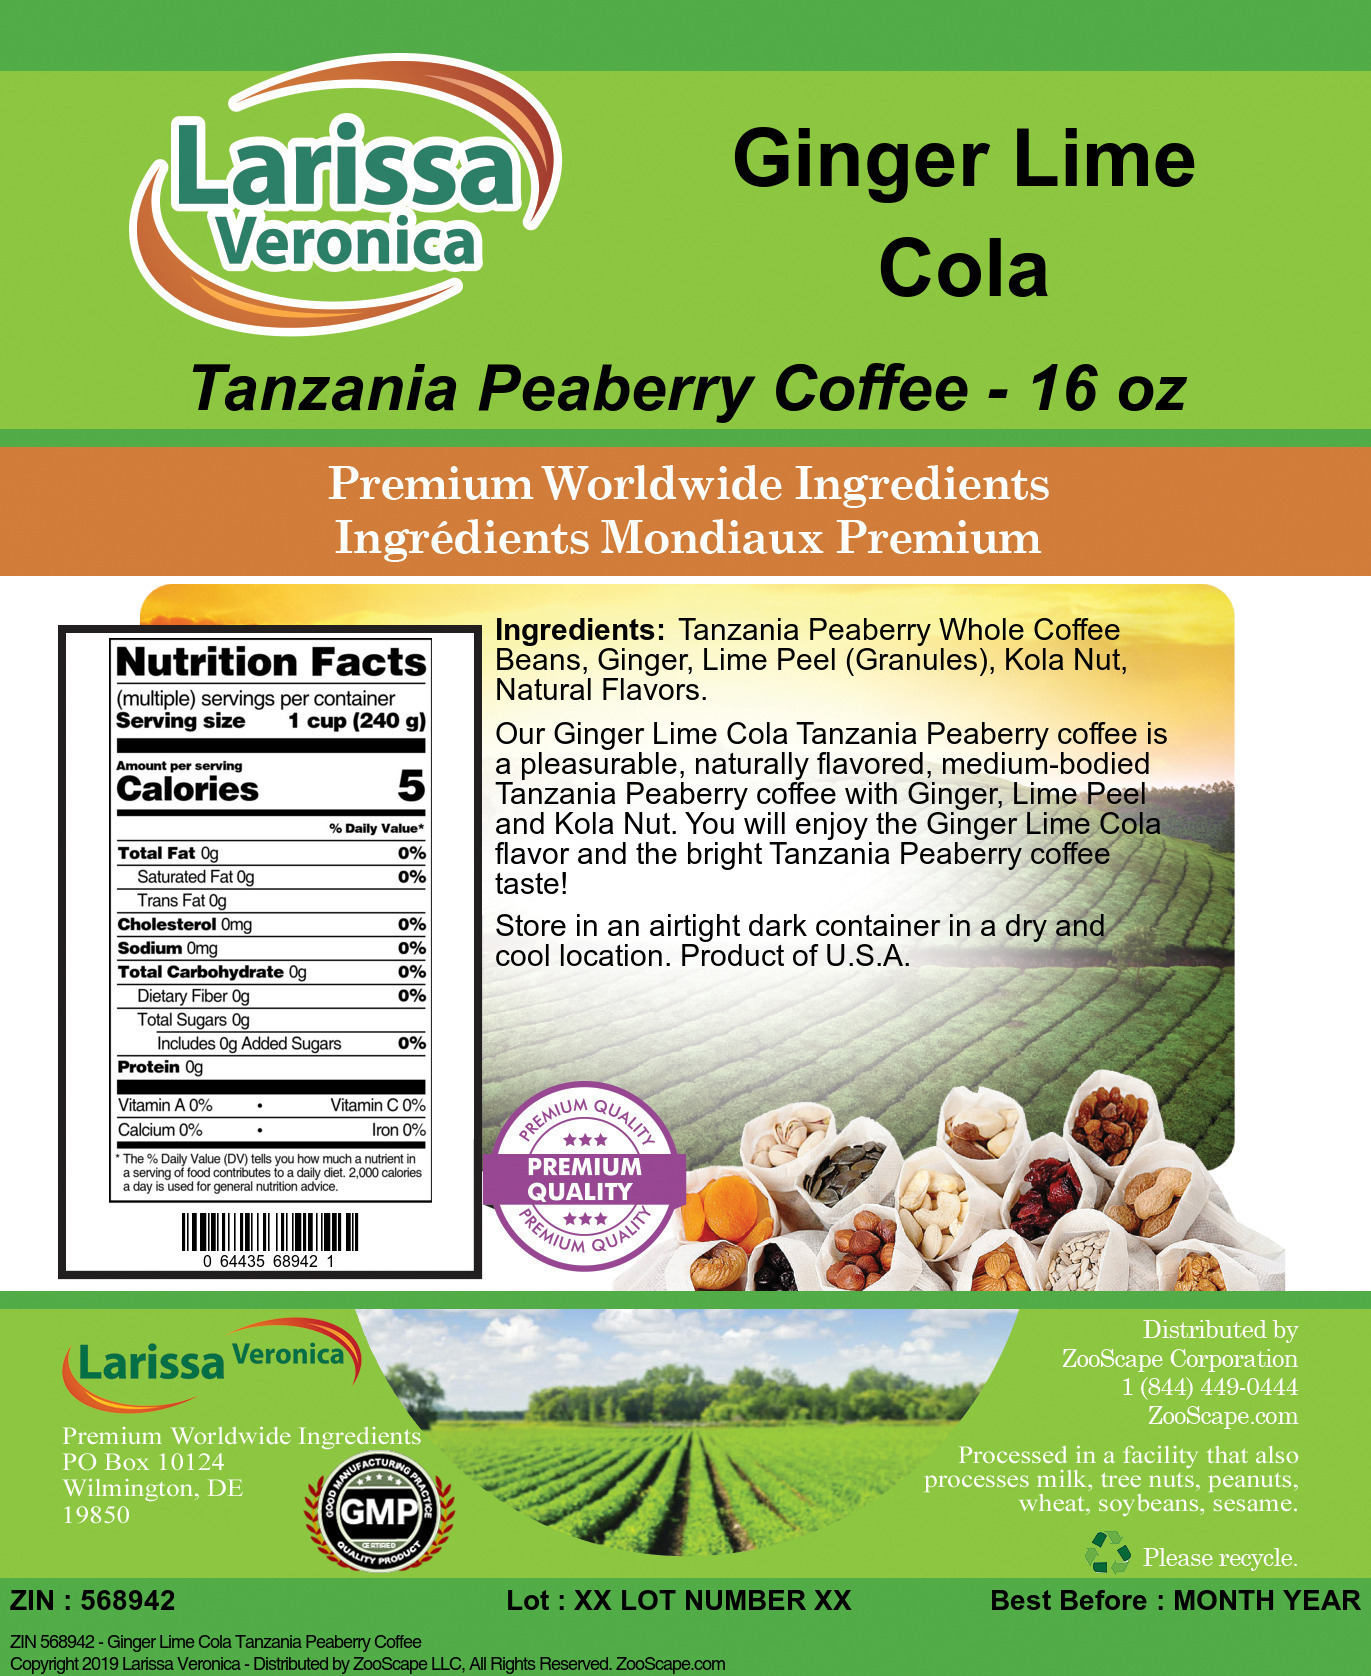 Ginger Lime Cola Tanzania Peaberry Coffee - Label